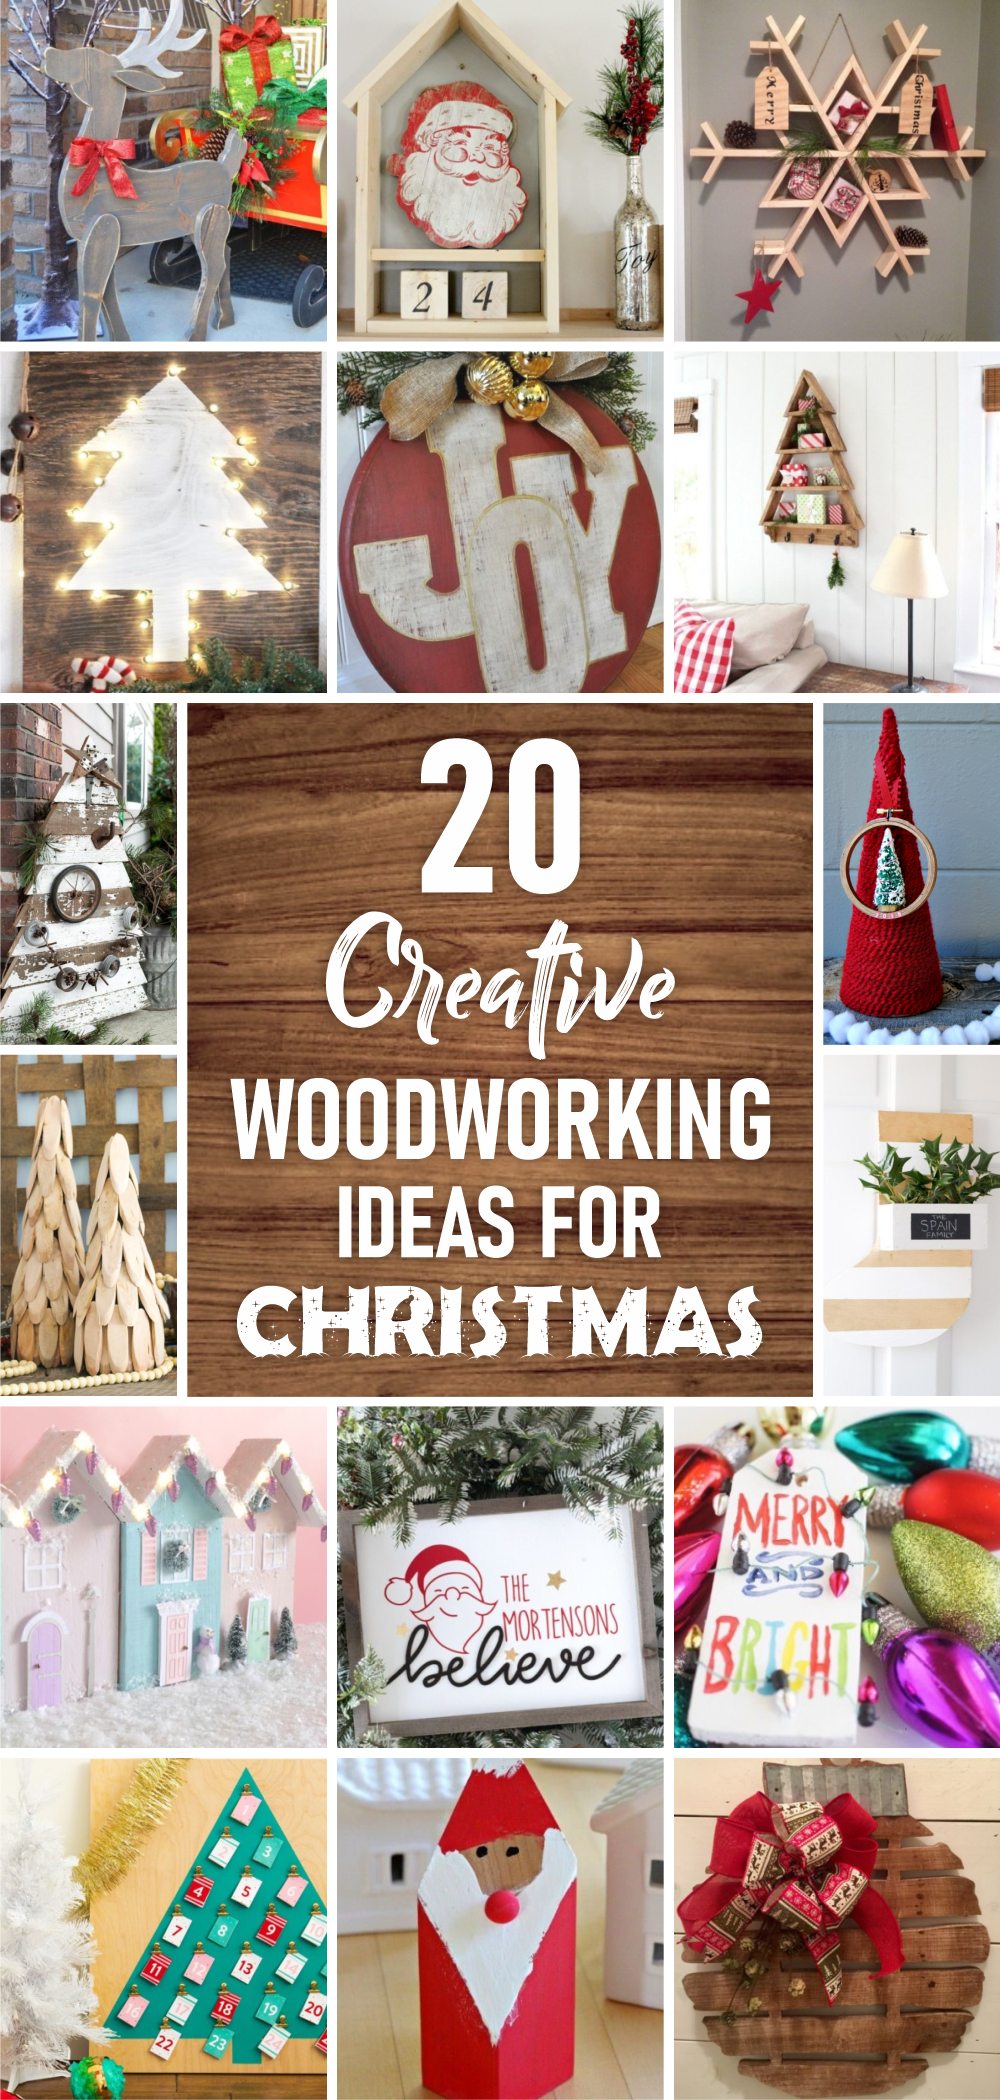 20 creative woodworking ideas for christmas 1